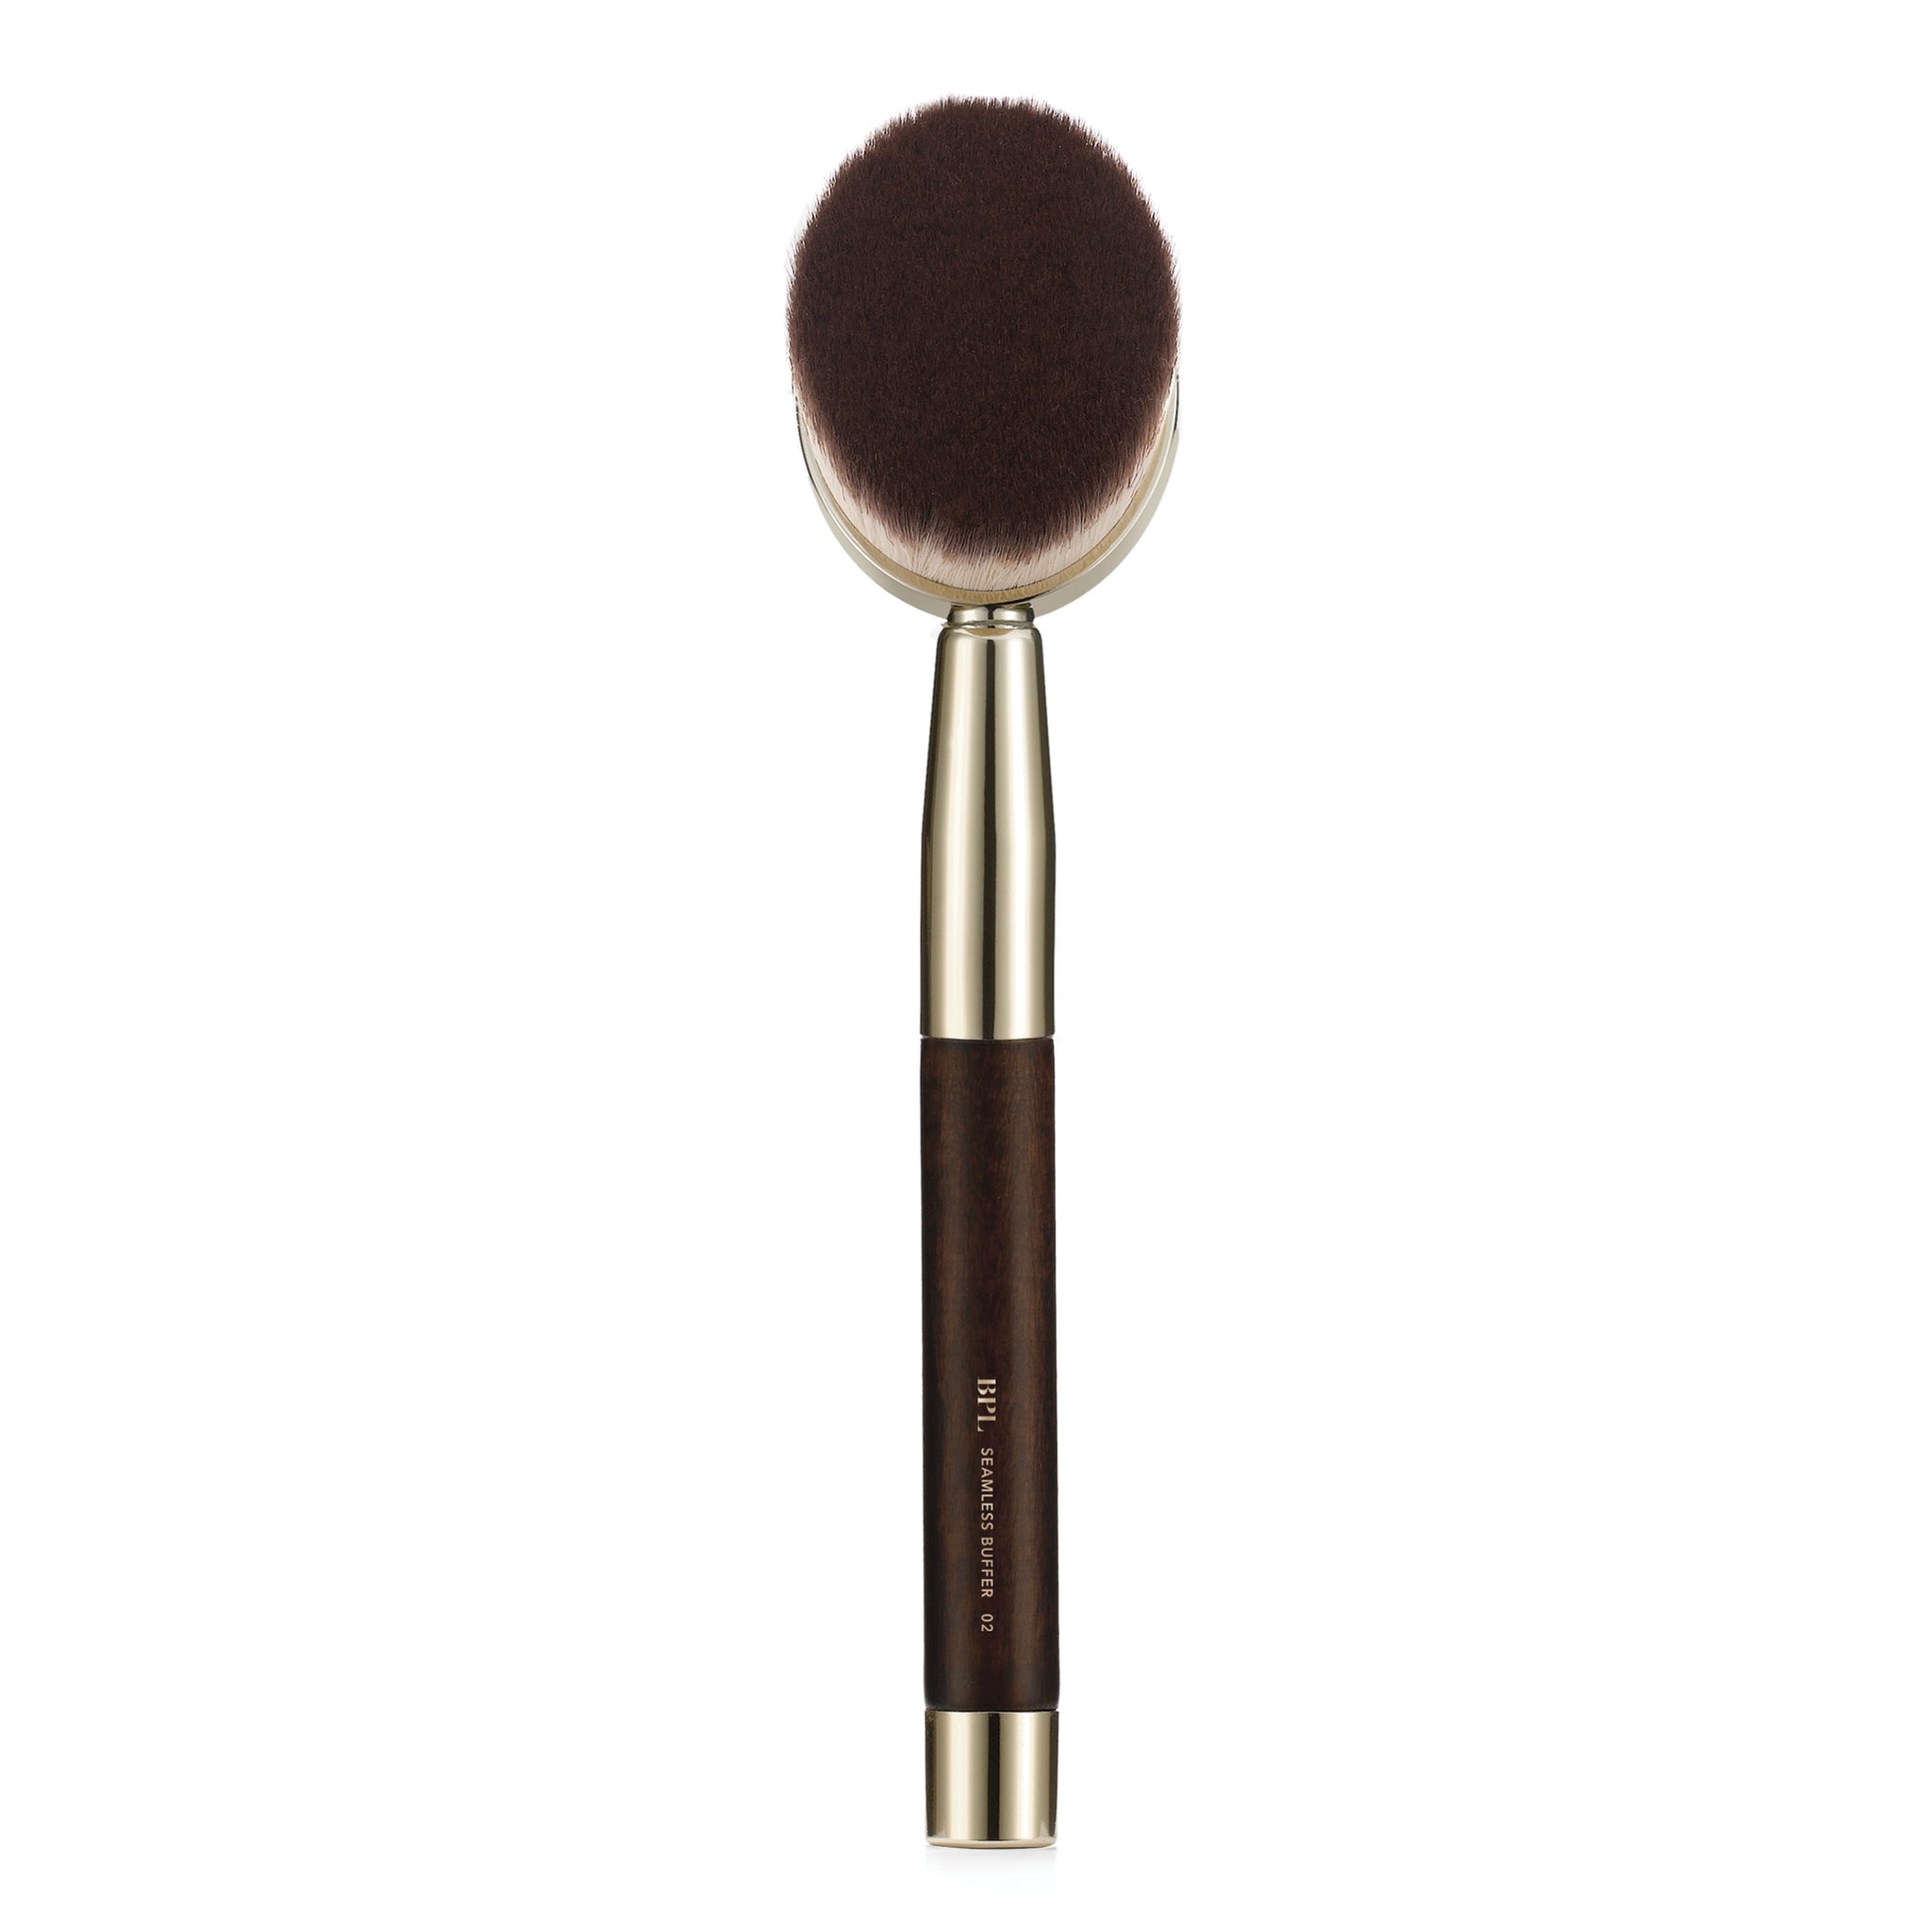 MAGNETIC BEAUTY COLLECTION: METAL BRUSH BASE